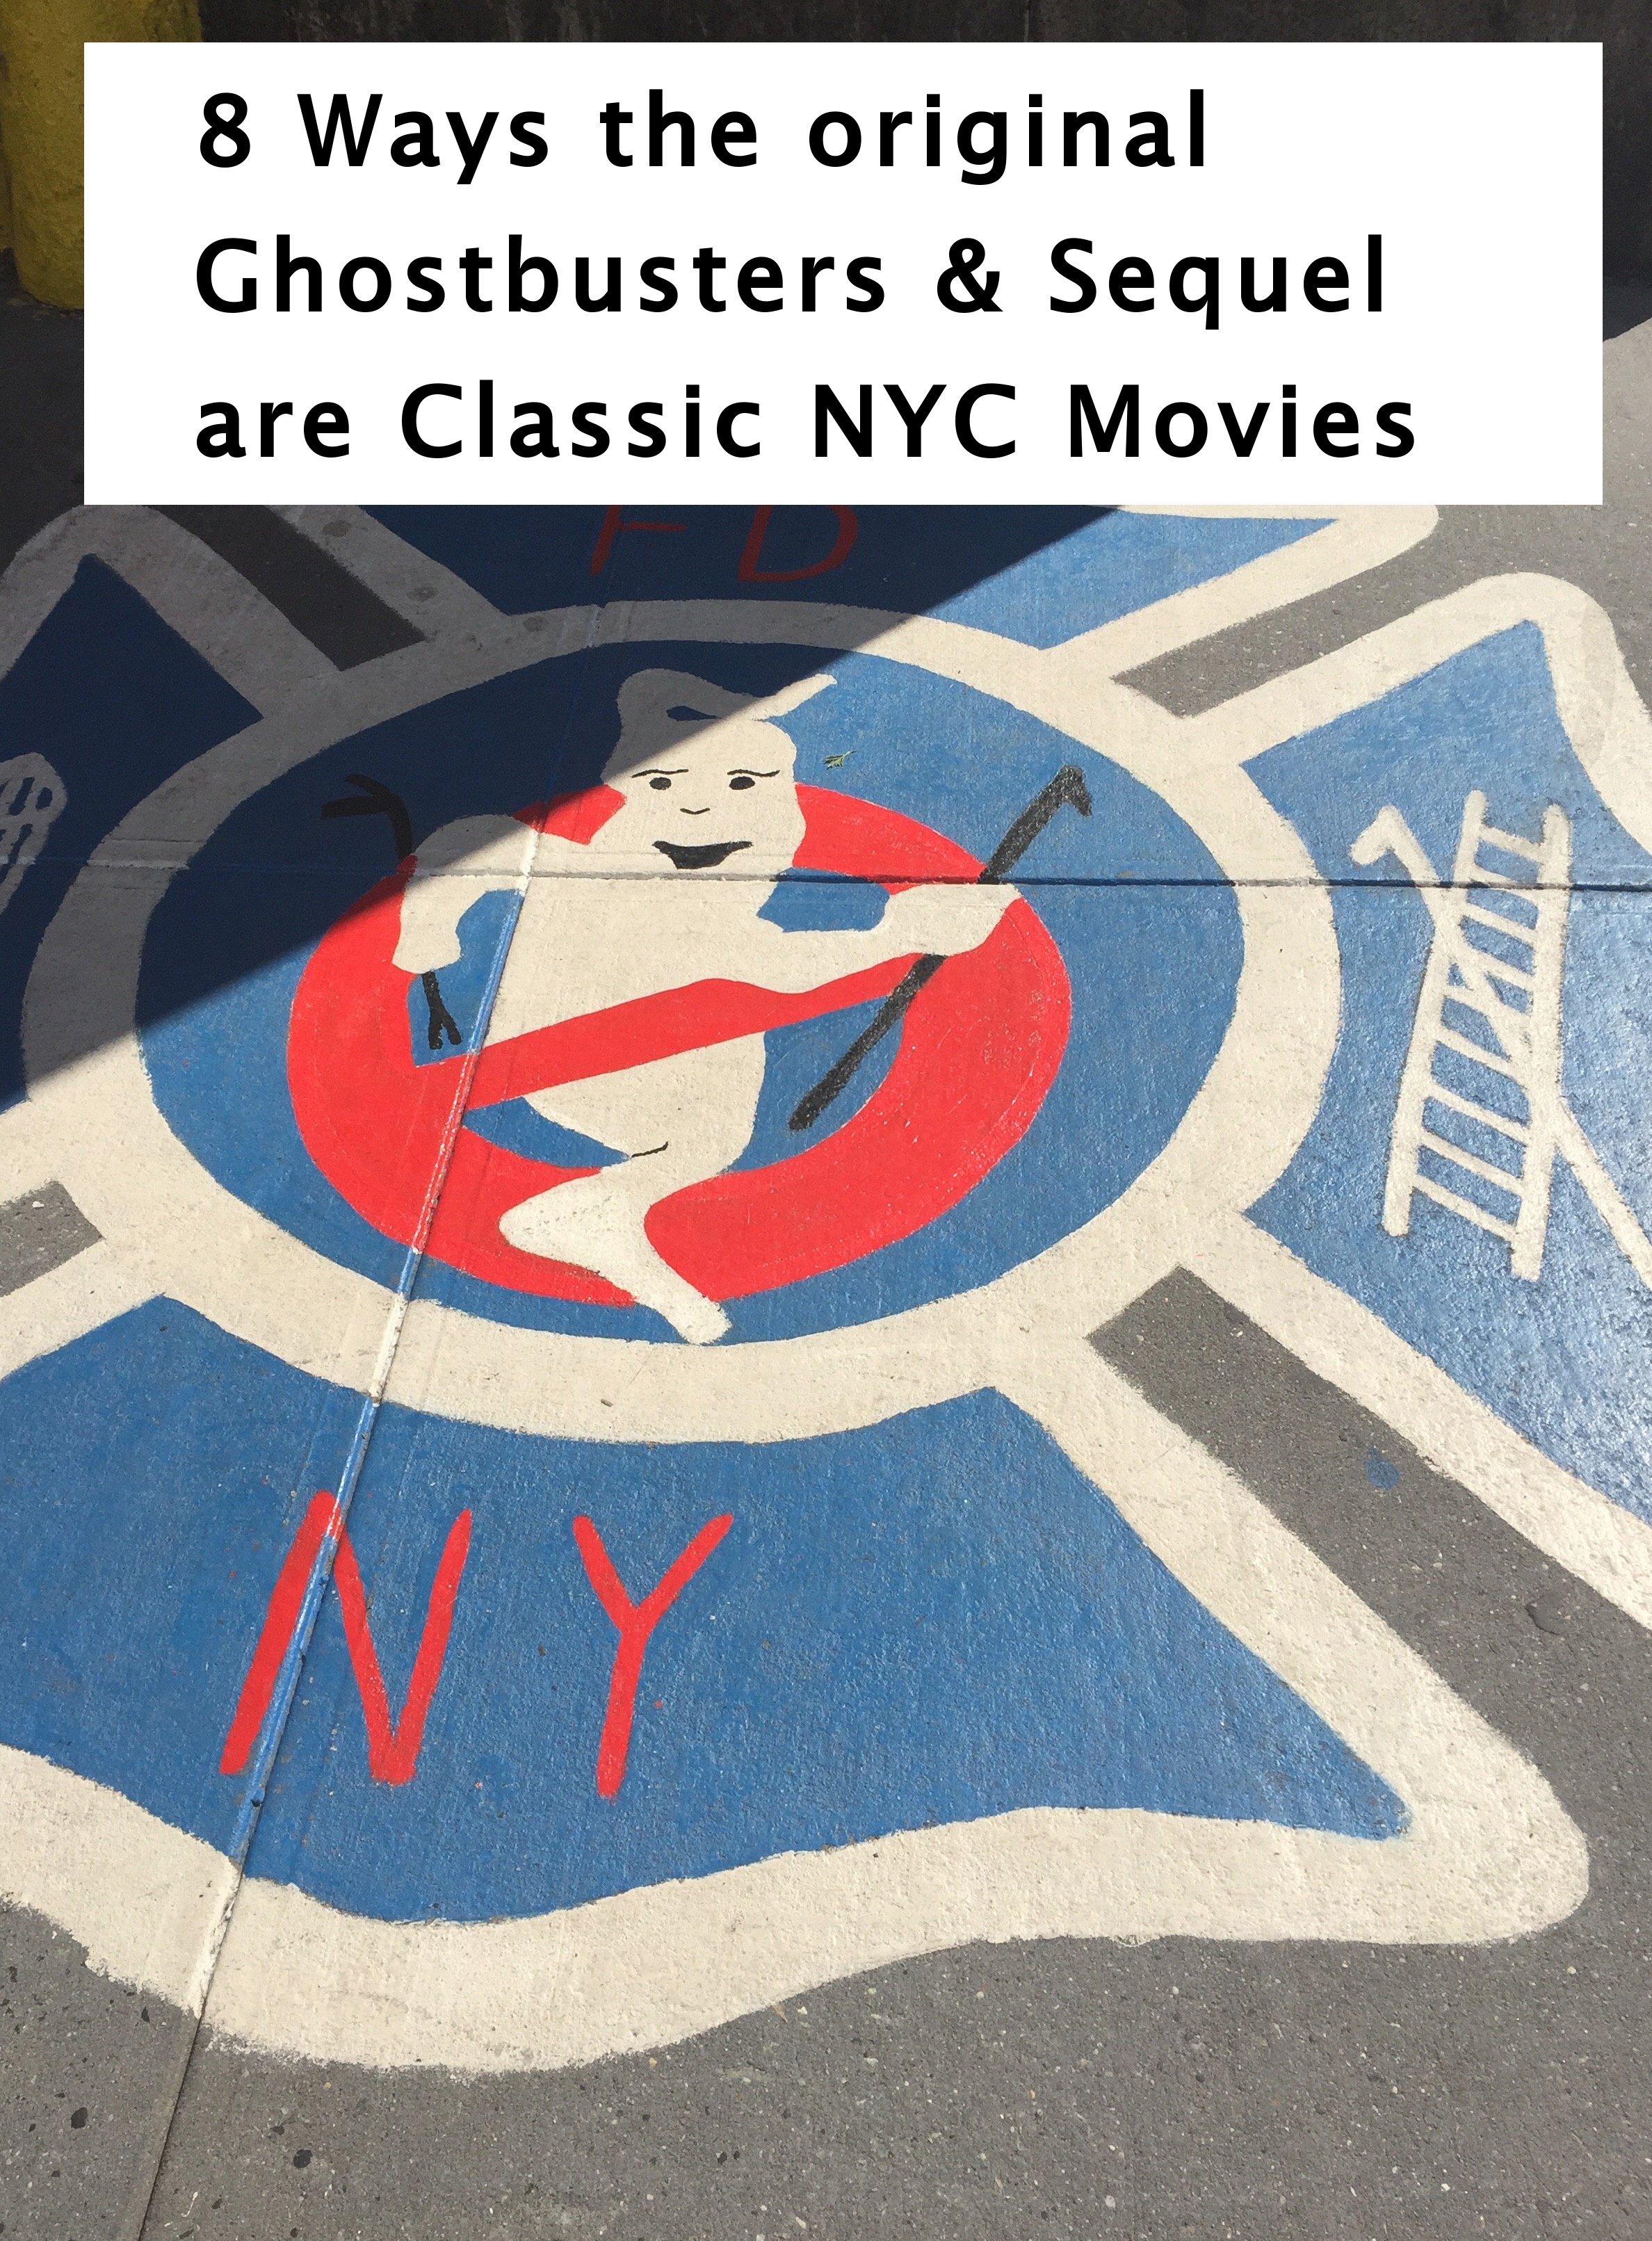 ... ghostbusters remake, movie reviews, old movies, nyc iconic landmarks